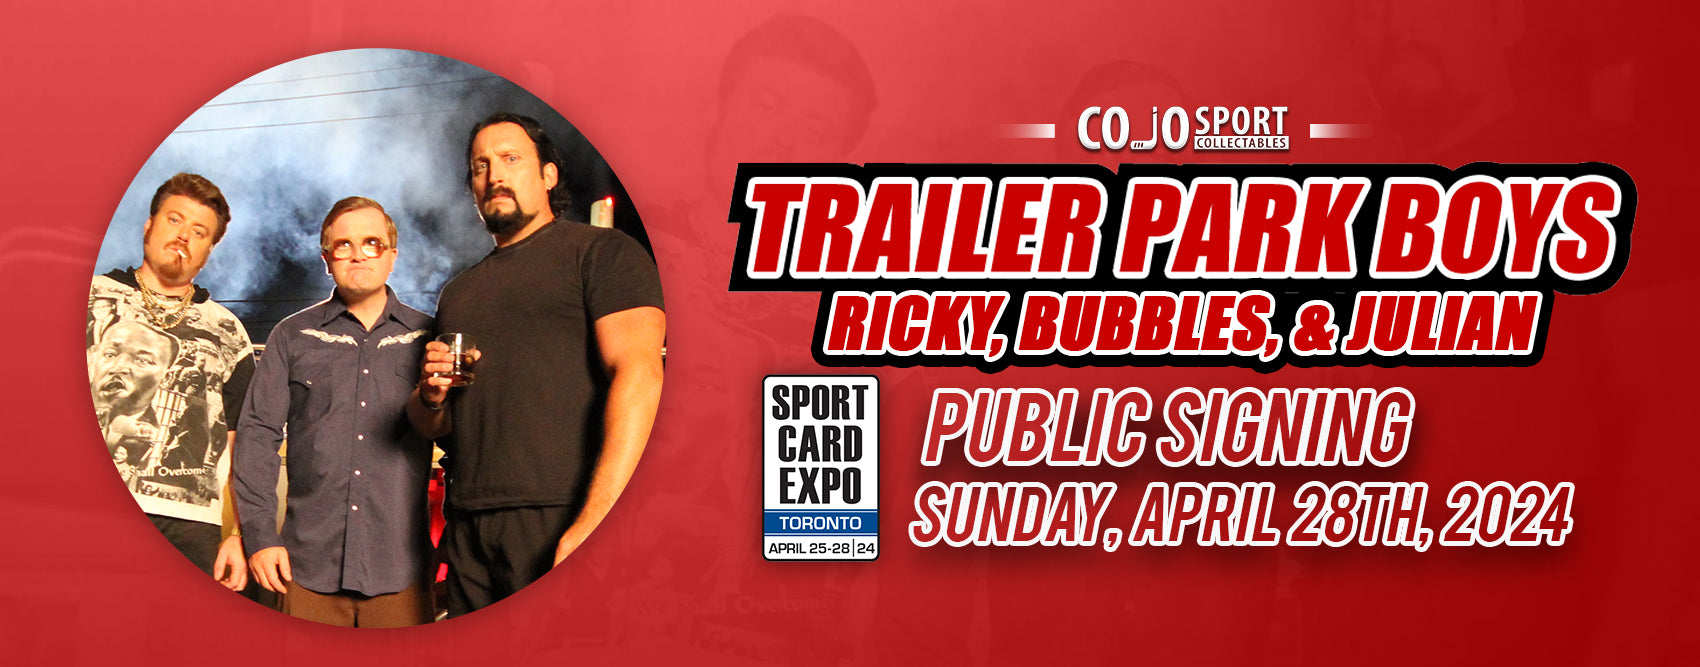 Trailer Park Boys Signing CoJo Sport Collectables